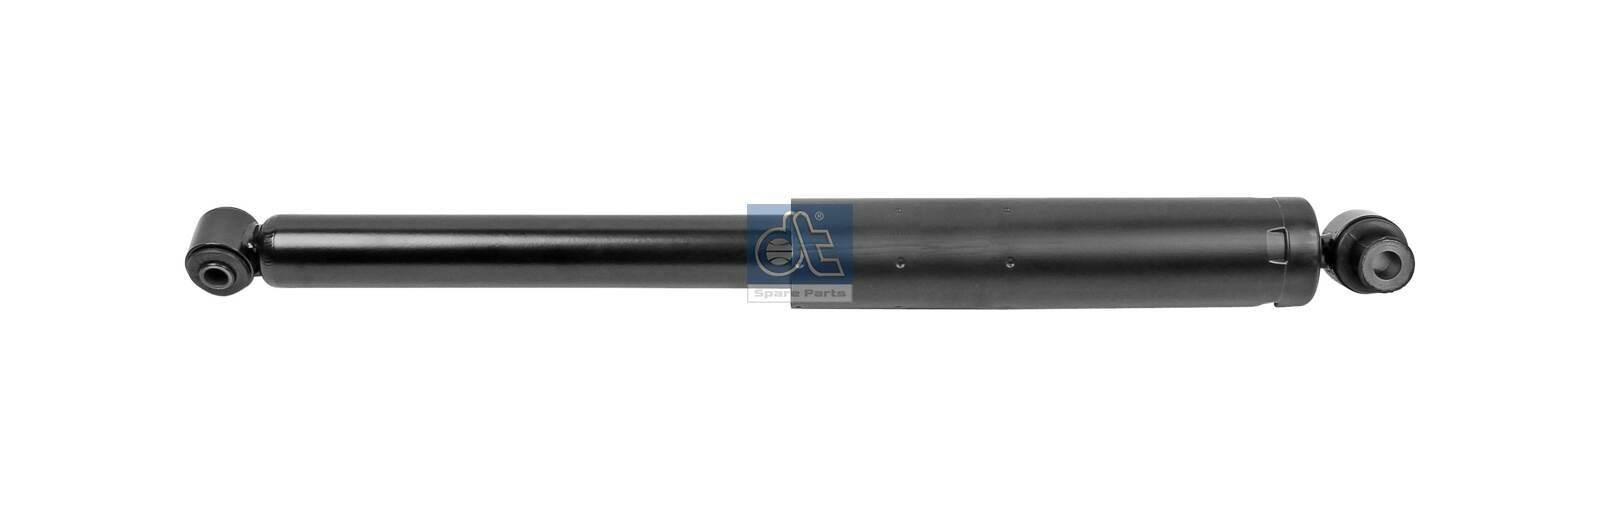 13.17157 DT Spare Parts Shocks FORD Rear Axle, Gas Pressure, Telescopic Shock Absorber, Top eye, Bottom eye